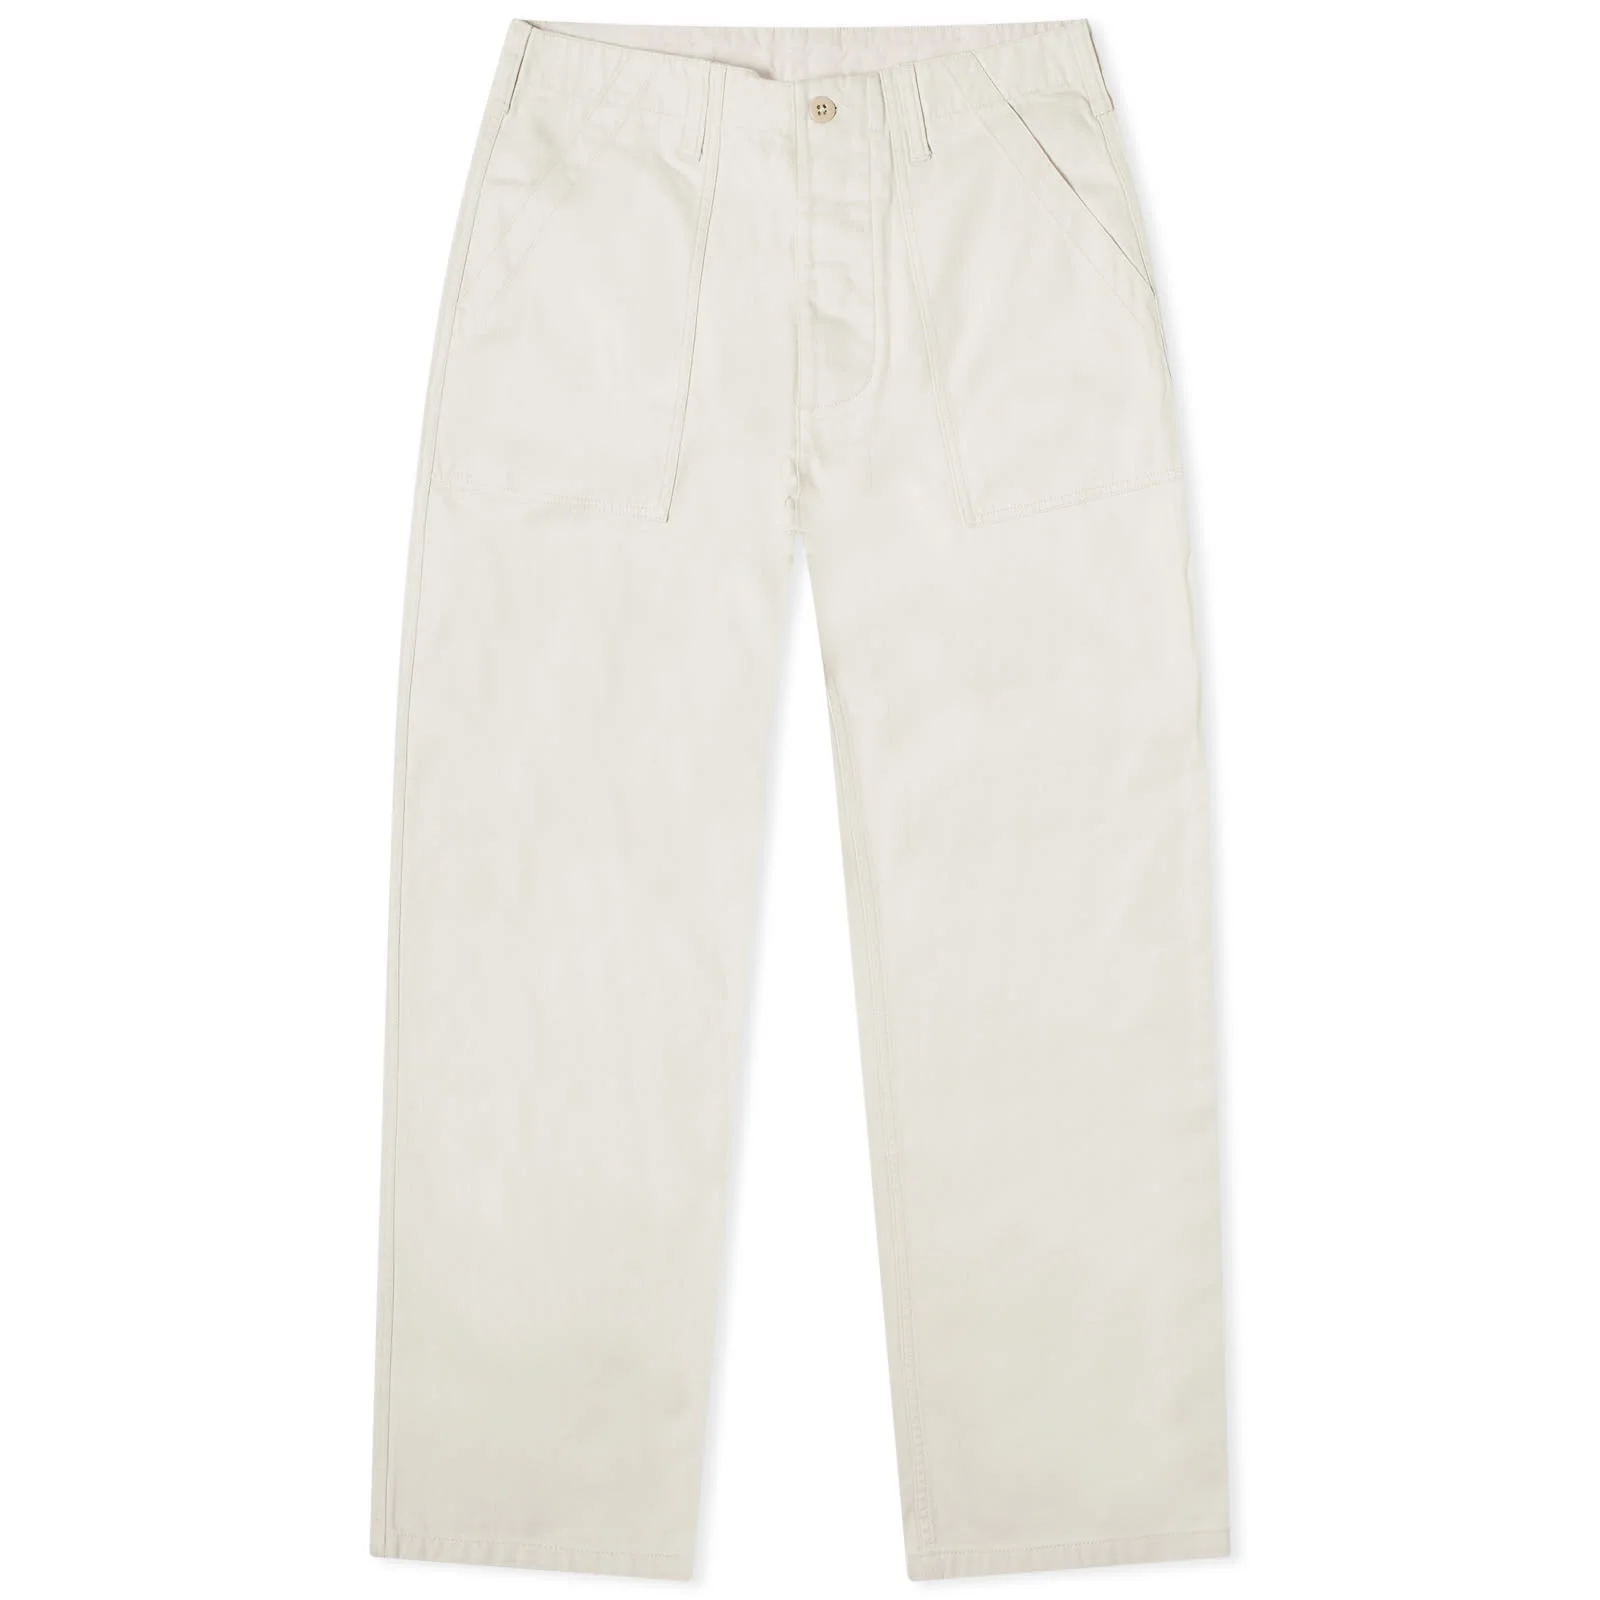 Life Fatigue Pants in Light Orewood Brown